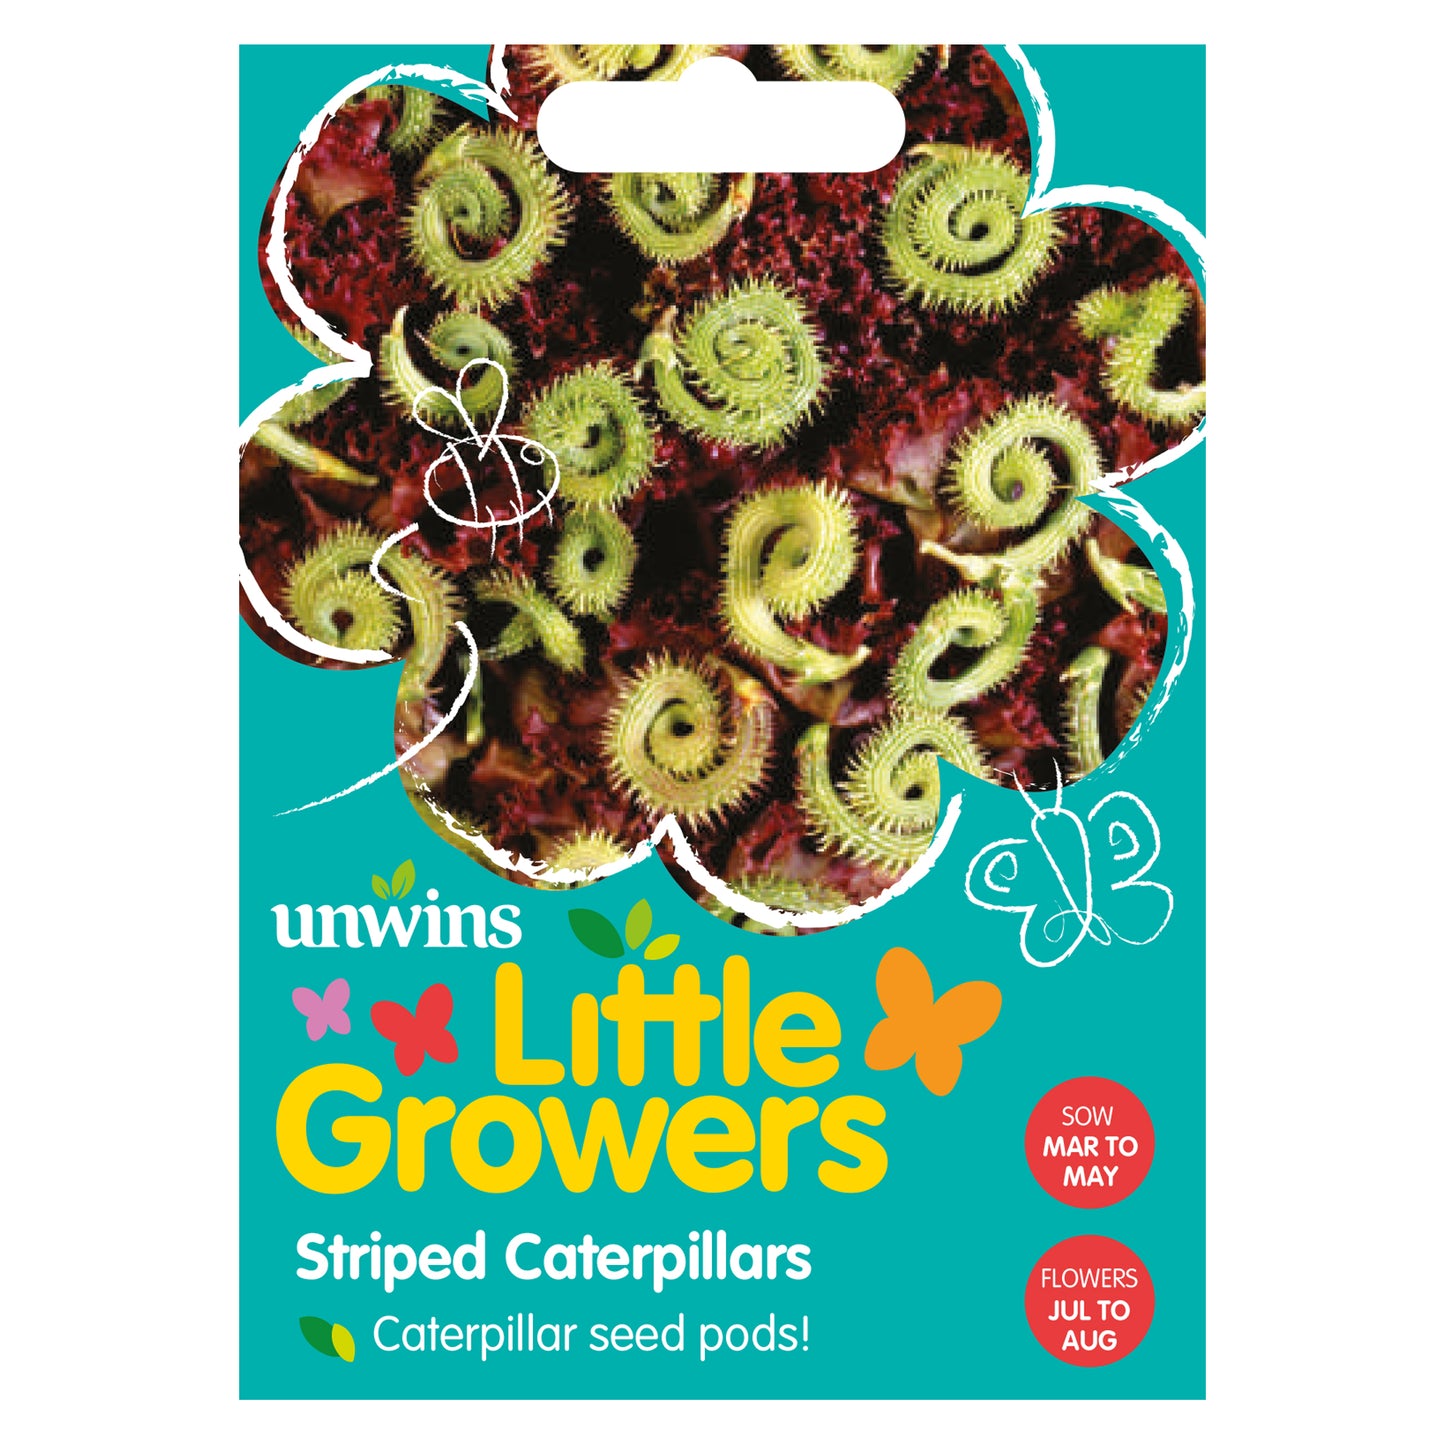 Little Growers Striped Caterpillars Seeds front of pack